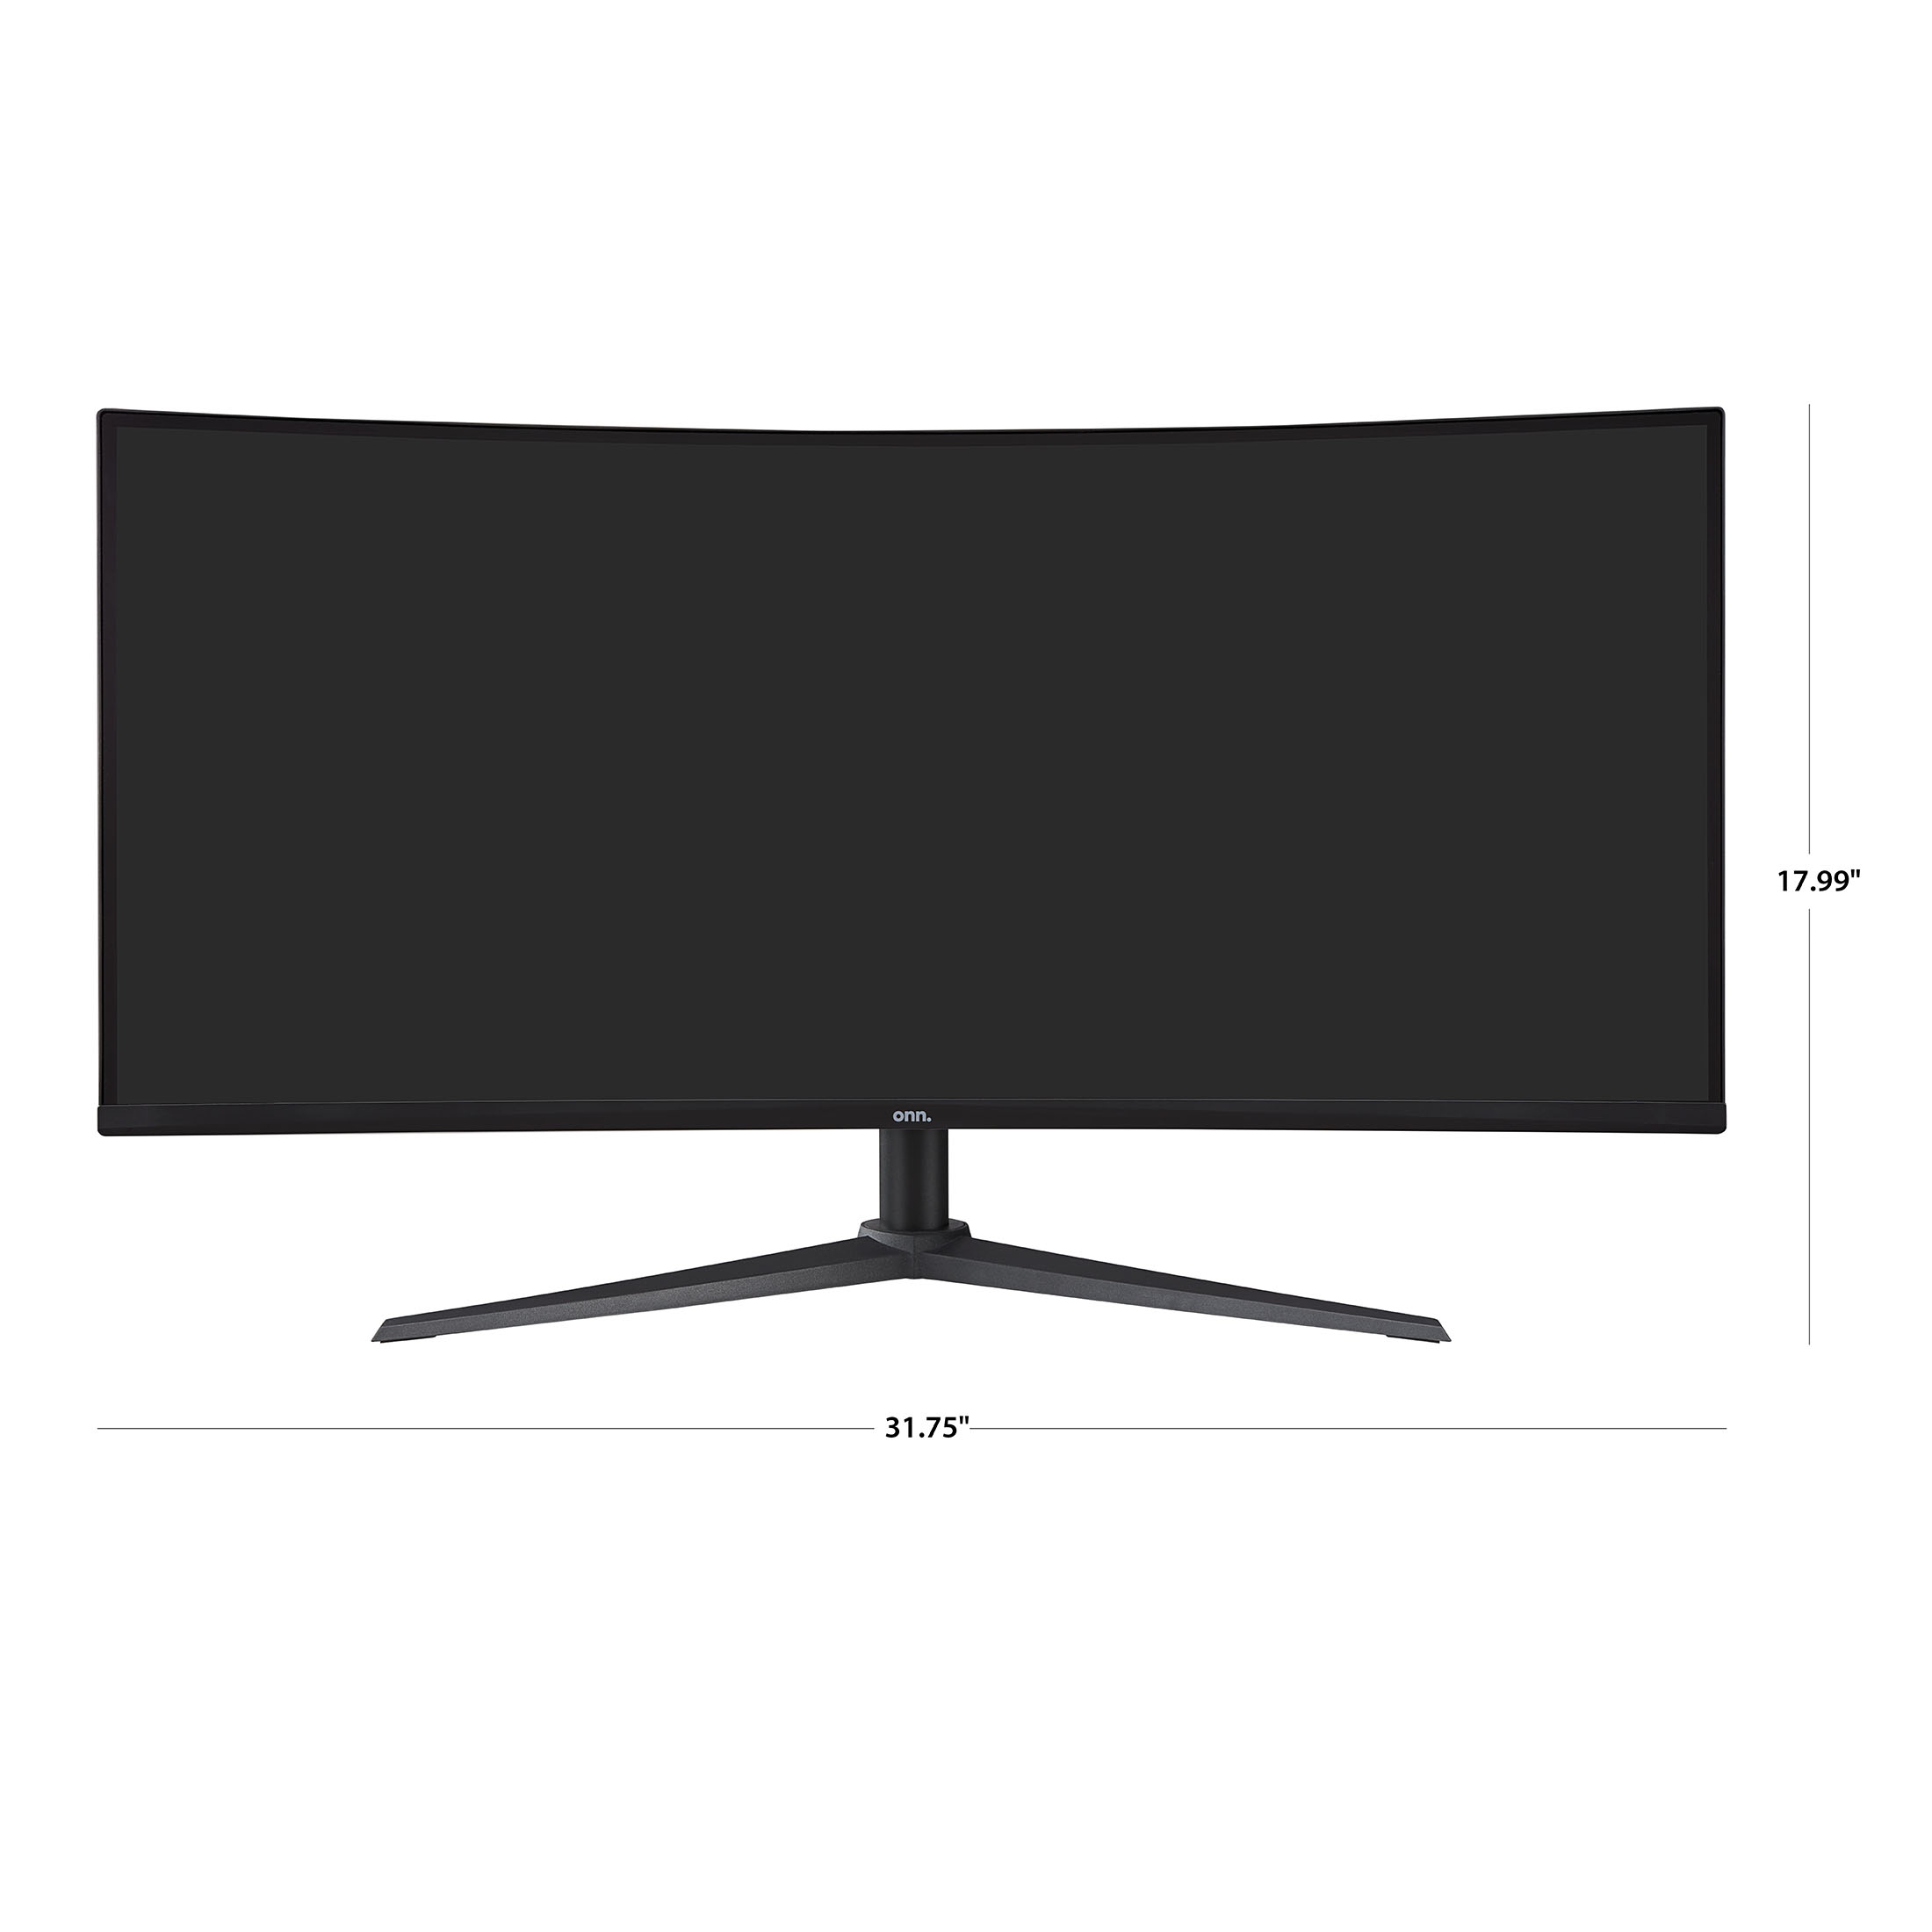 onn. 34" Curved Ultrawide WQHD (3440 x 1440p) 100Hz Bezel-Less Office Monitor with Cable, Black - image 4 of 9